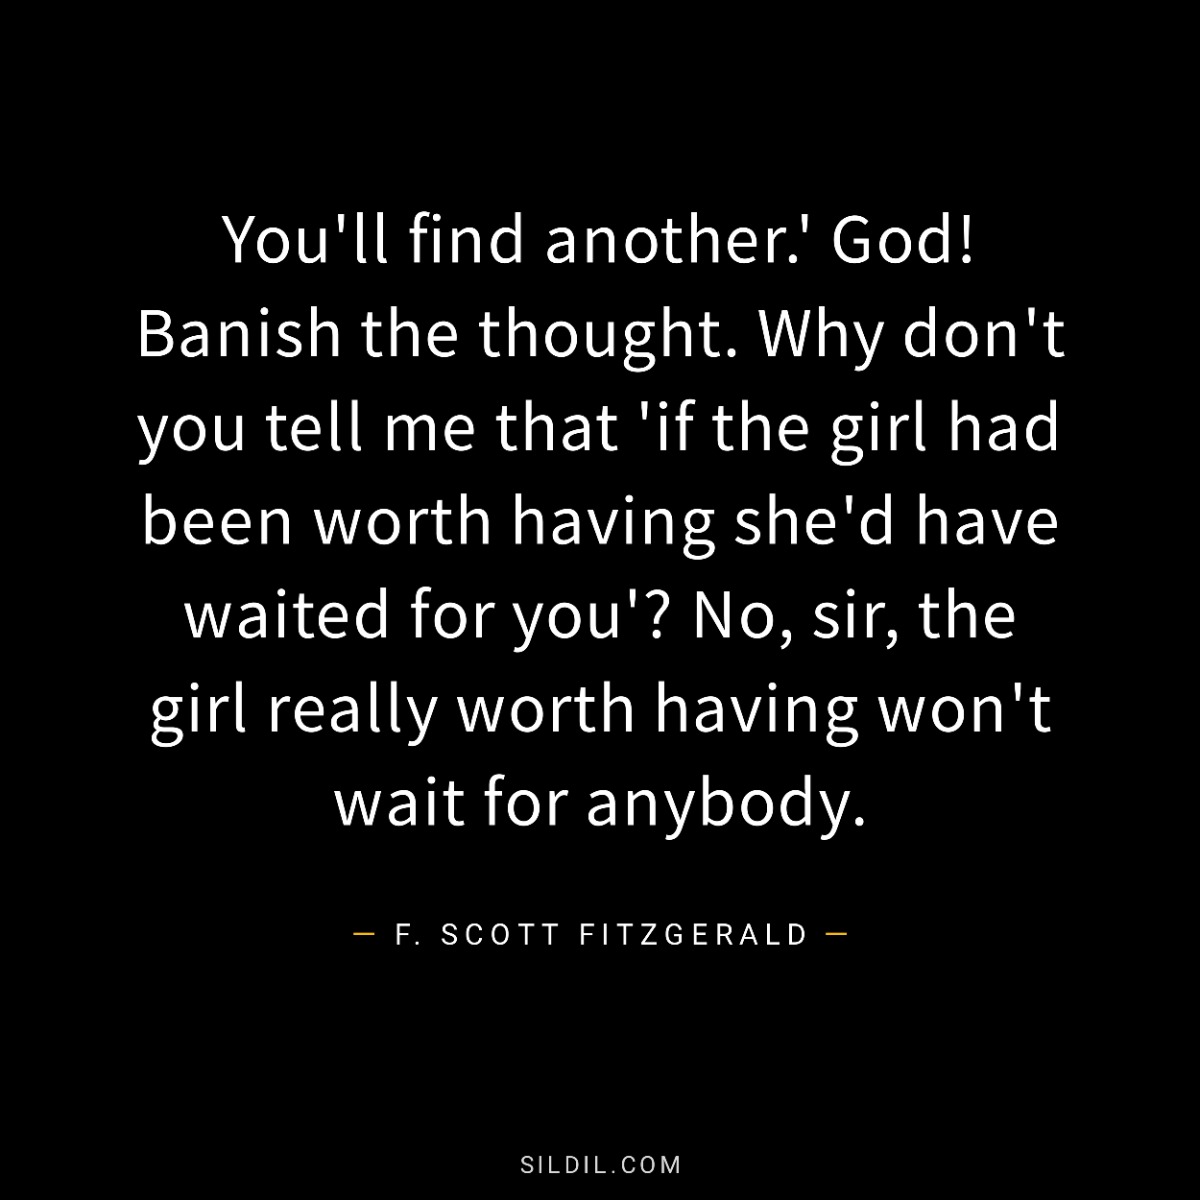 You'll find another.' God! Banish the thought. Why don't you tell me that 'if the girl had been worth having she'd have waited for you'? No, sir, the girl really worth having won't wait for anybody.